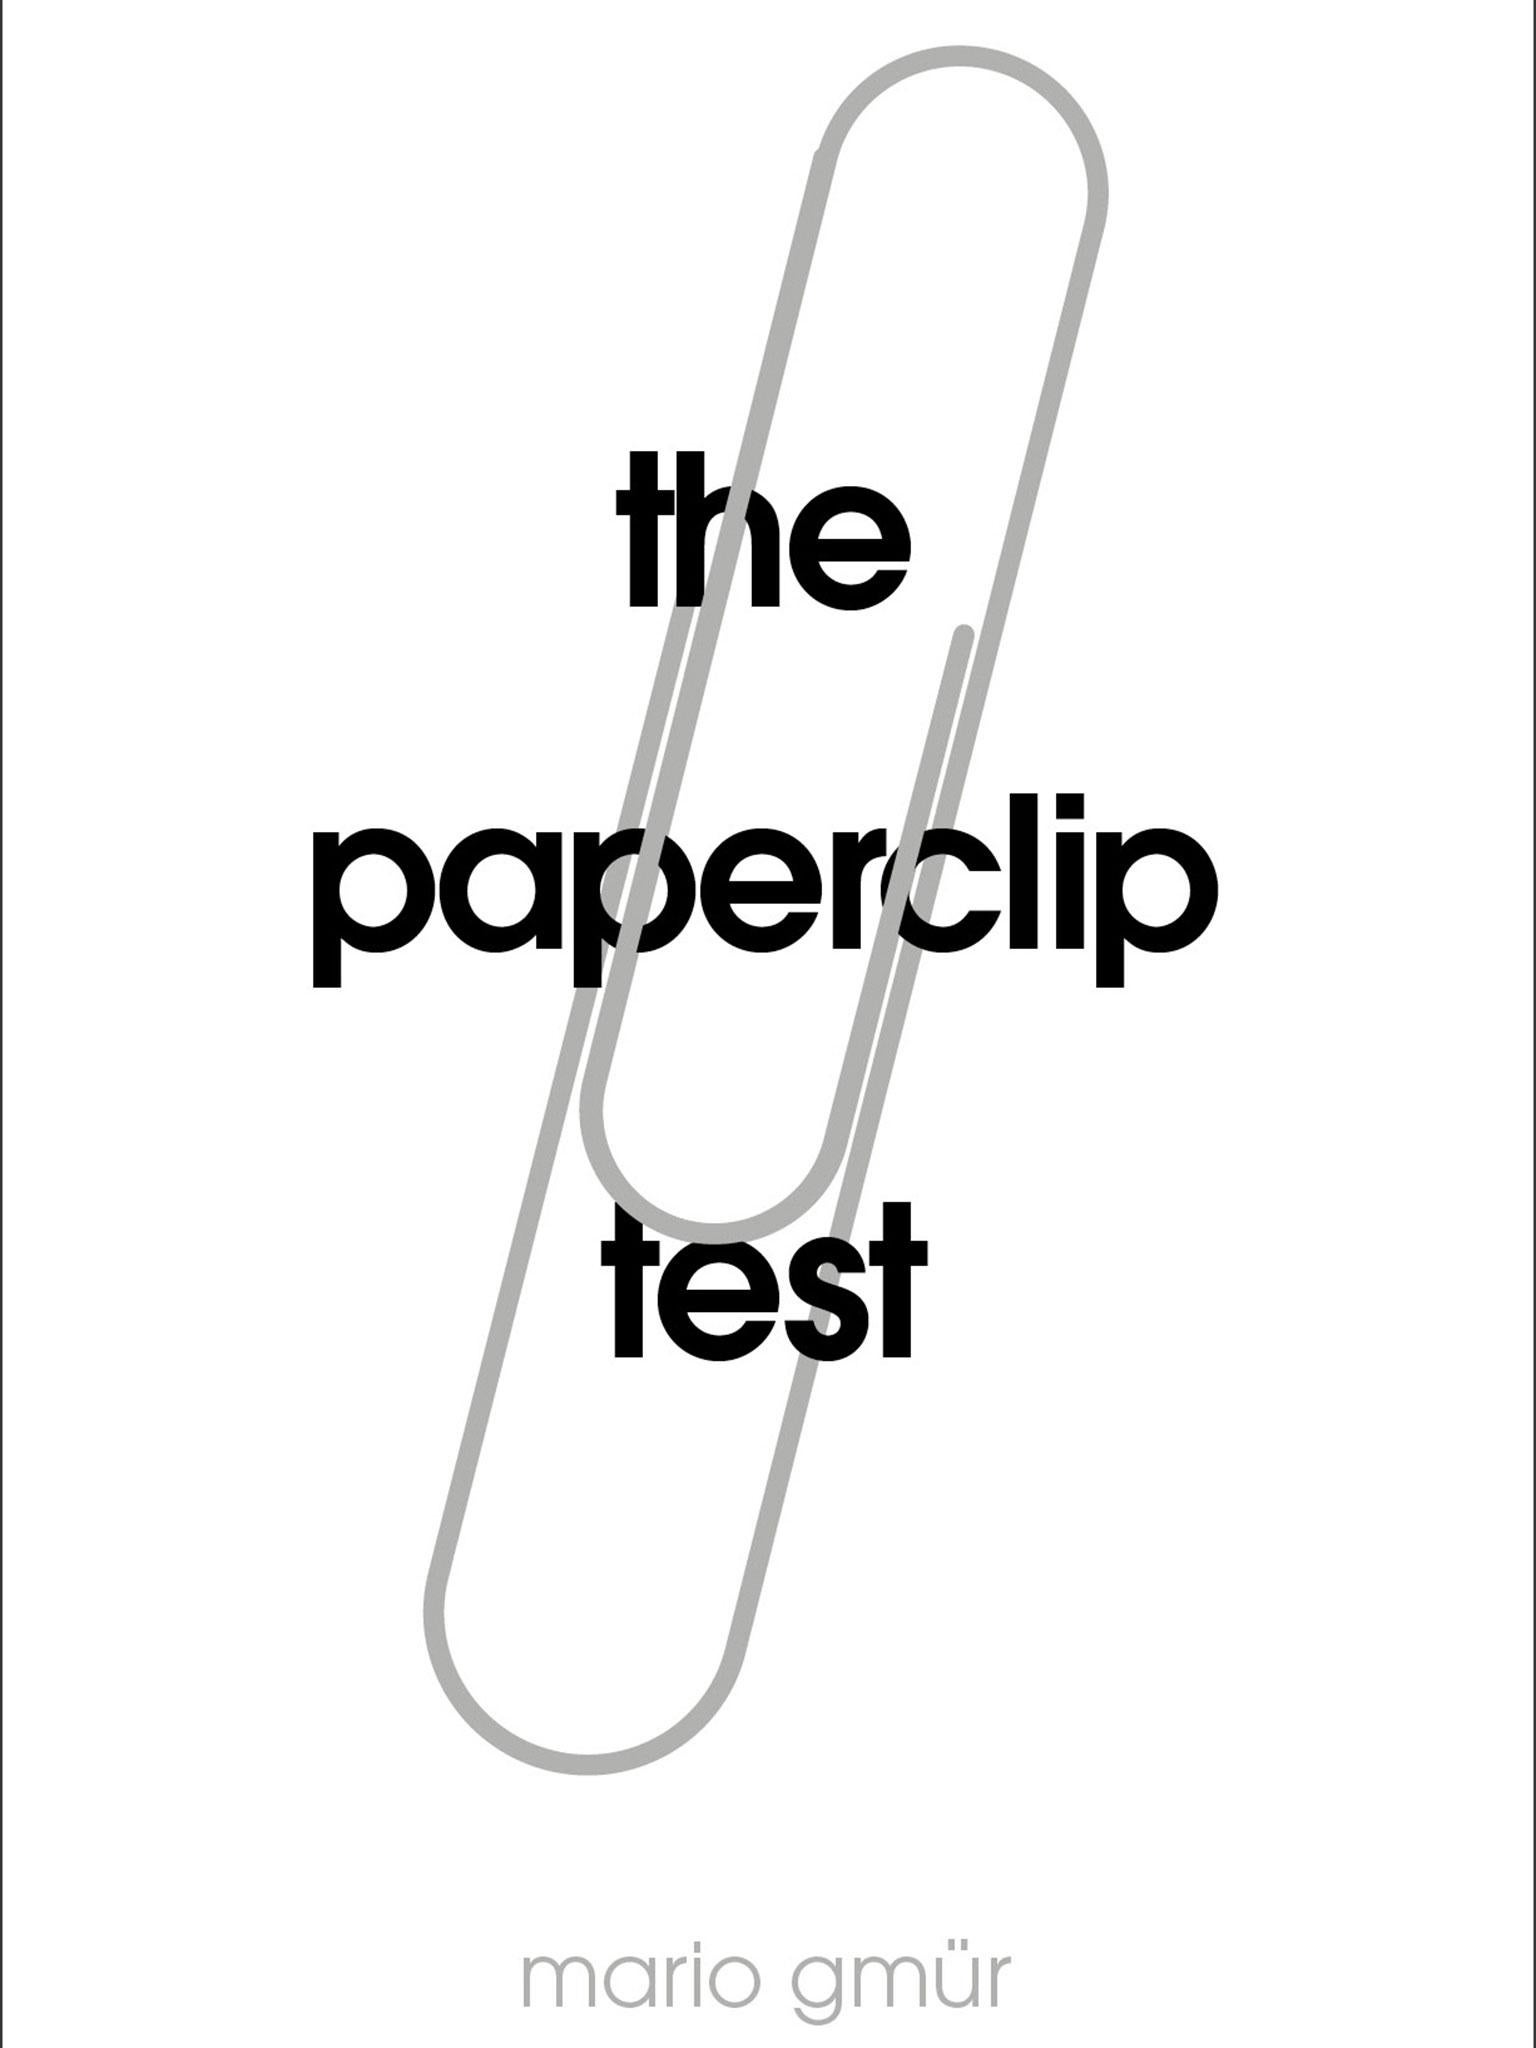 The Paperclip Test by Mario Gmur